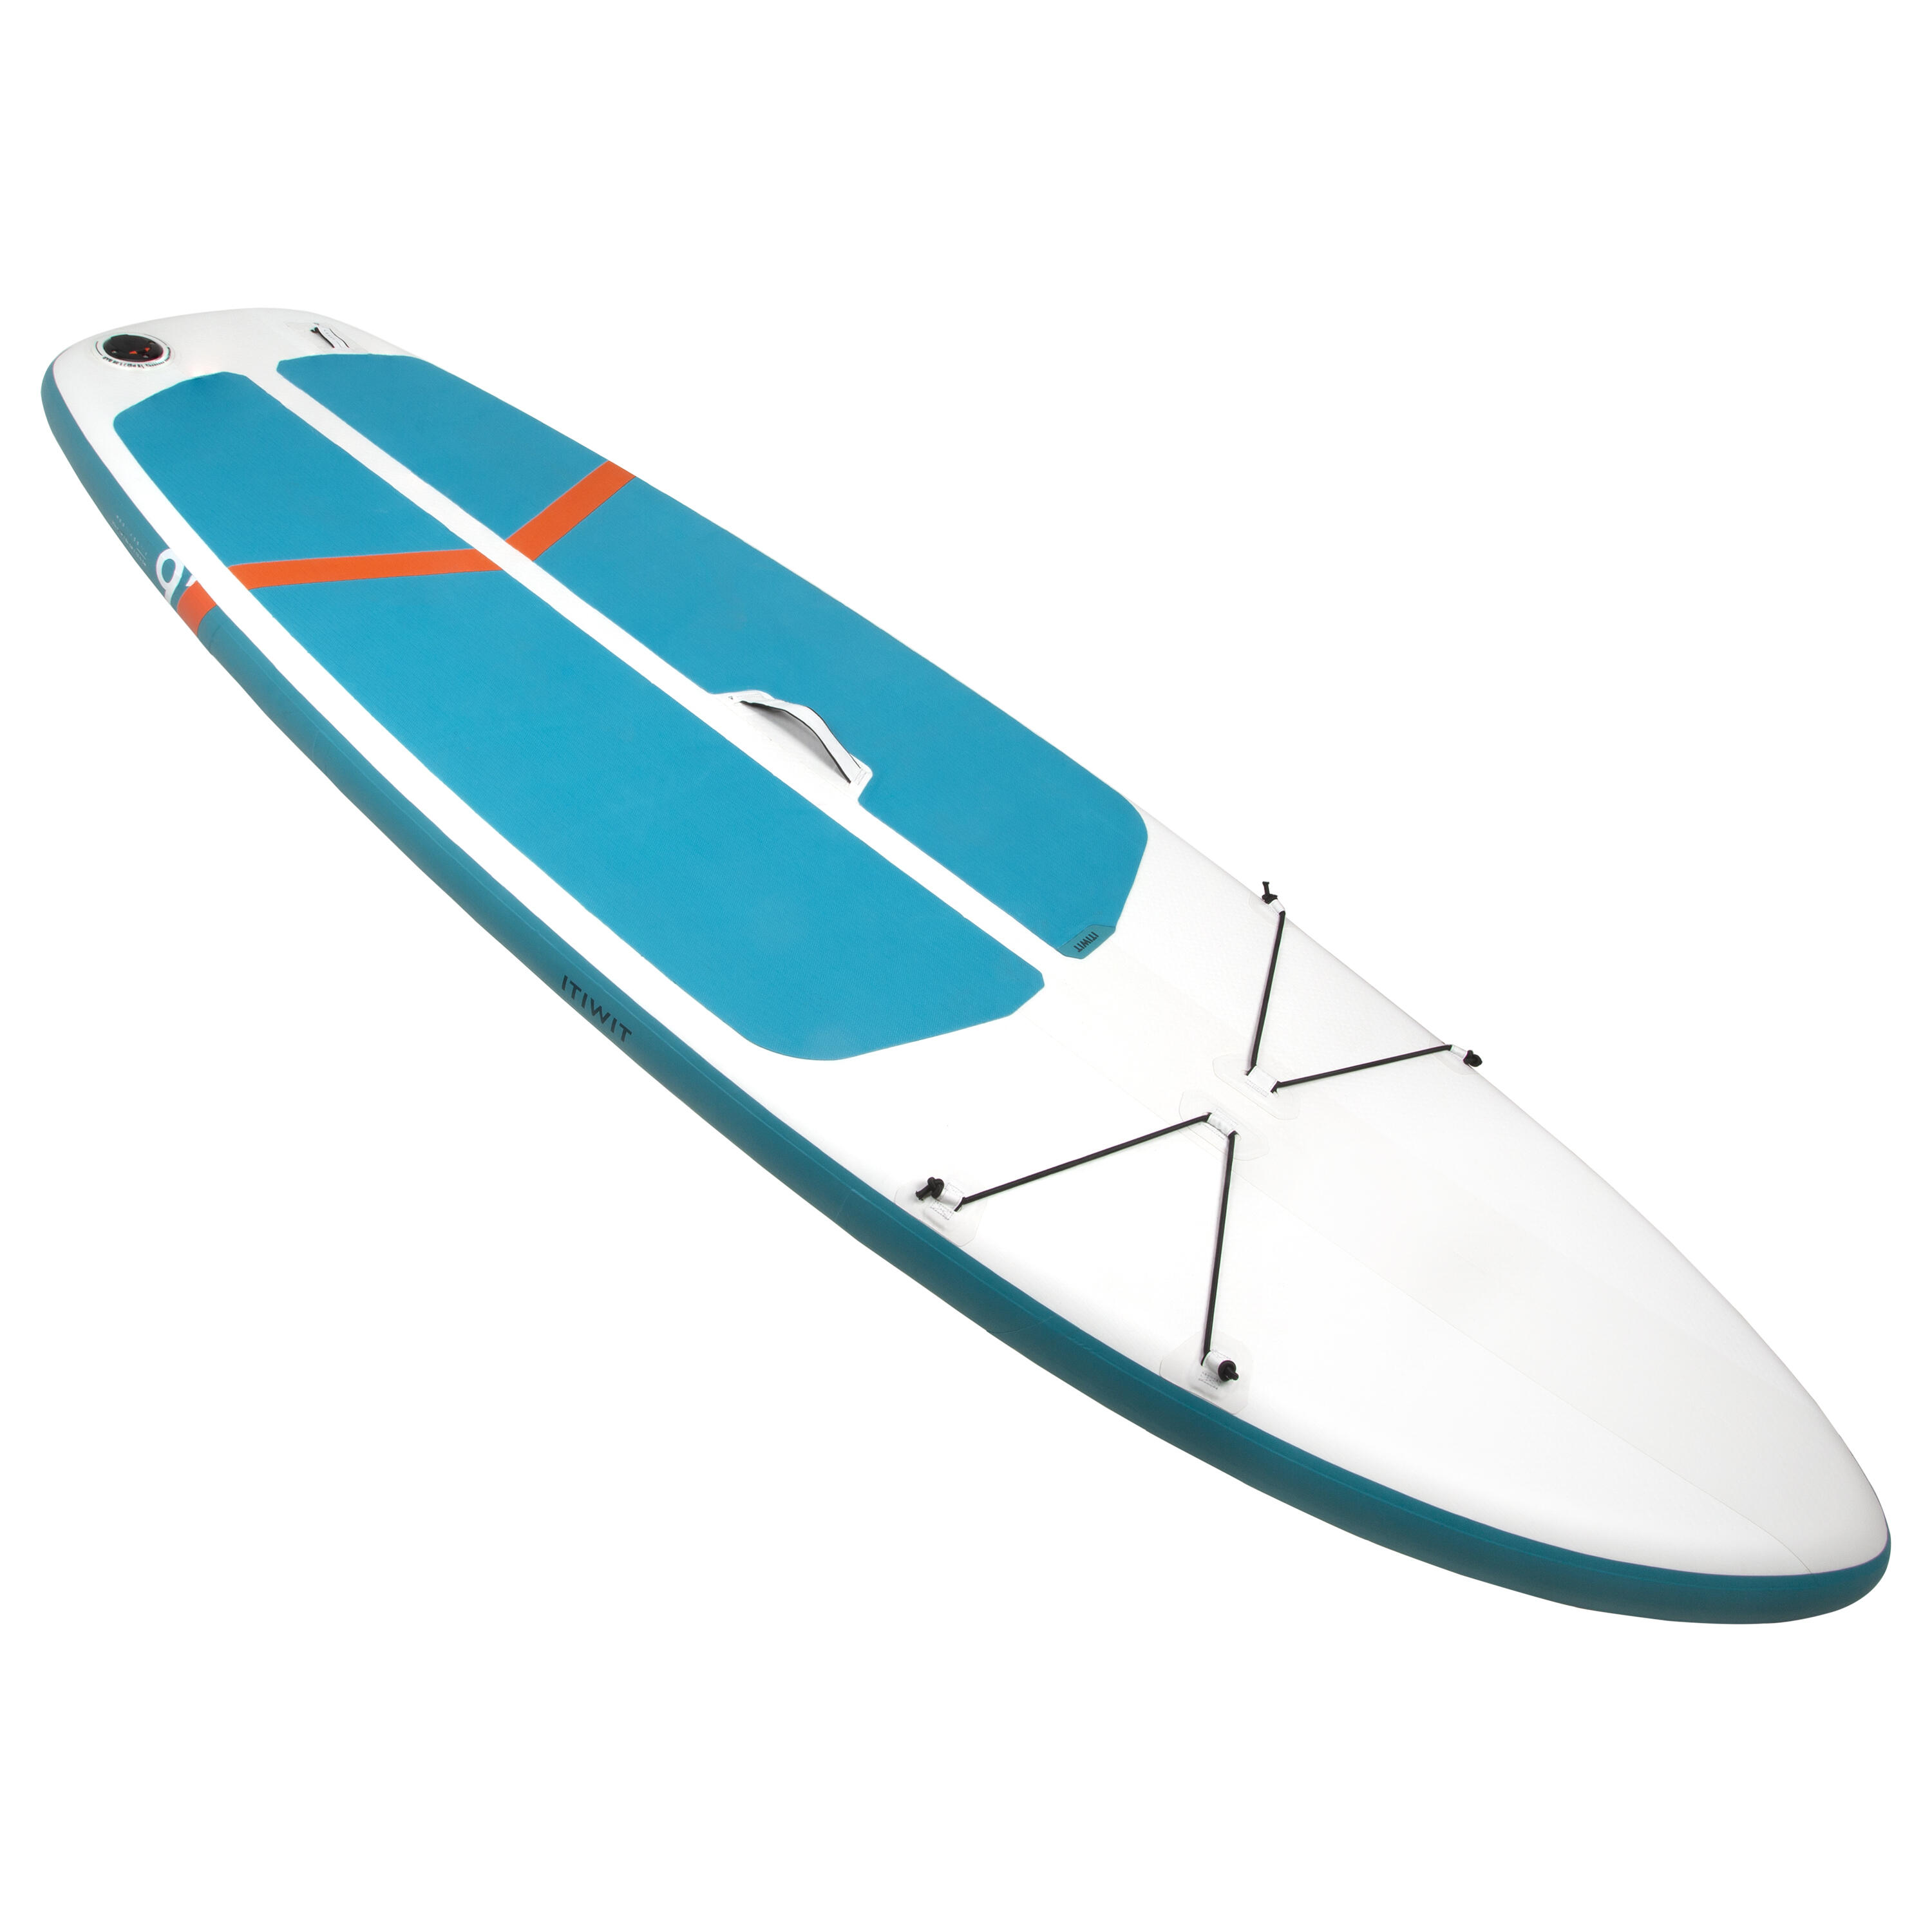 100 COMPACT 9FT (M) INFLATABLE STAND-UP PADDLEBOARD - WHITE AND GREEN (80kg) 4/29